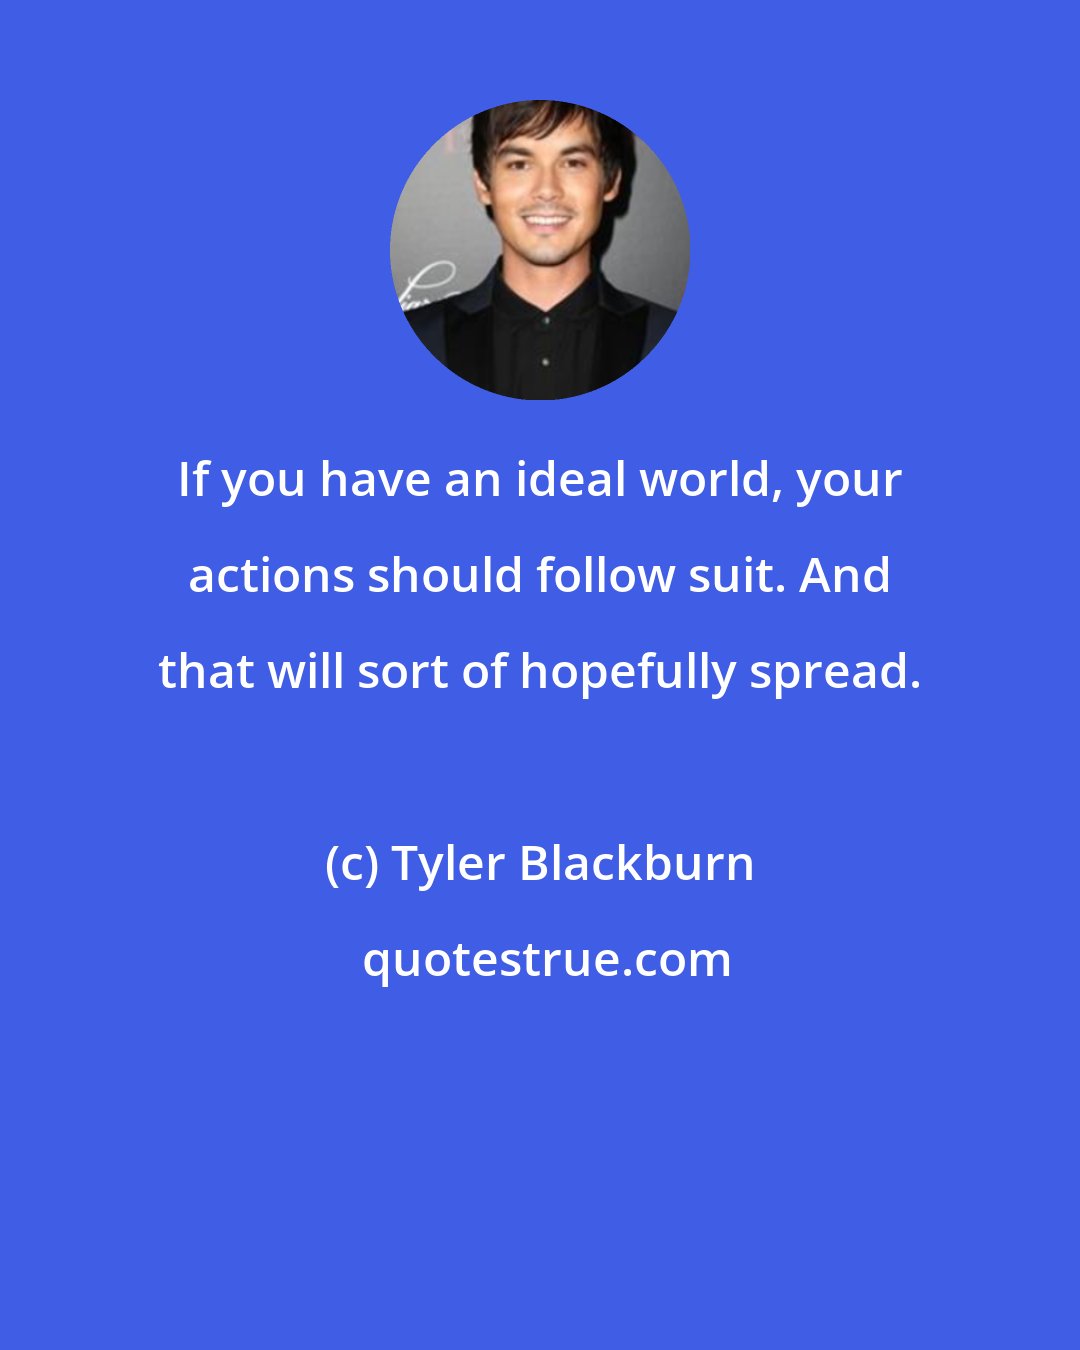 Tyler Blackburn: If you have an ideal world, your actions should follow suit. And that will sort of hopefully spread.